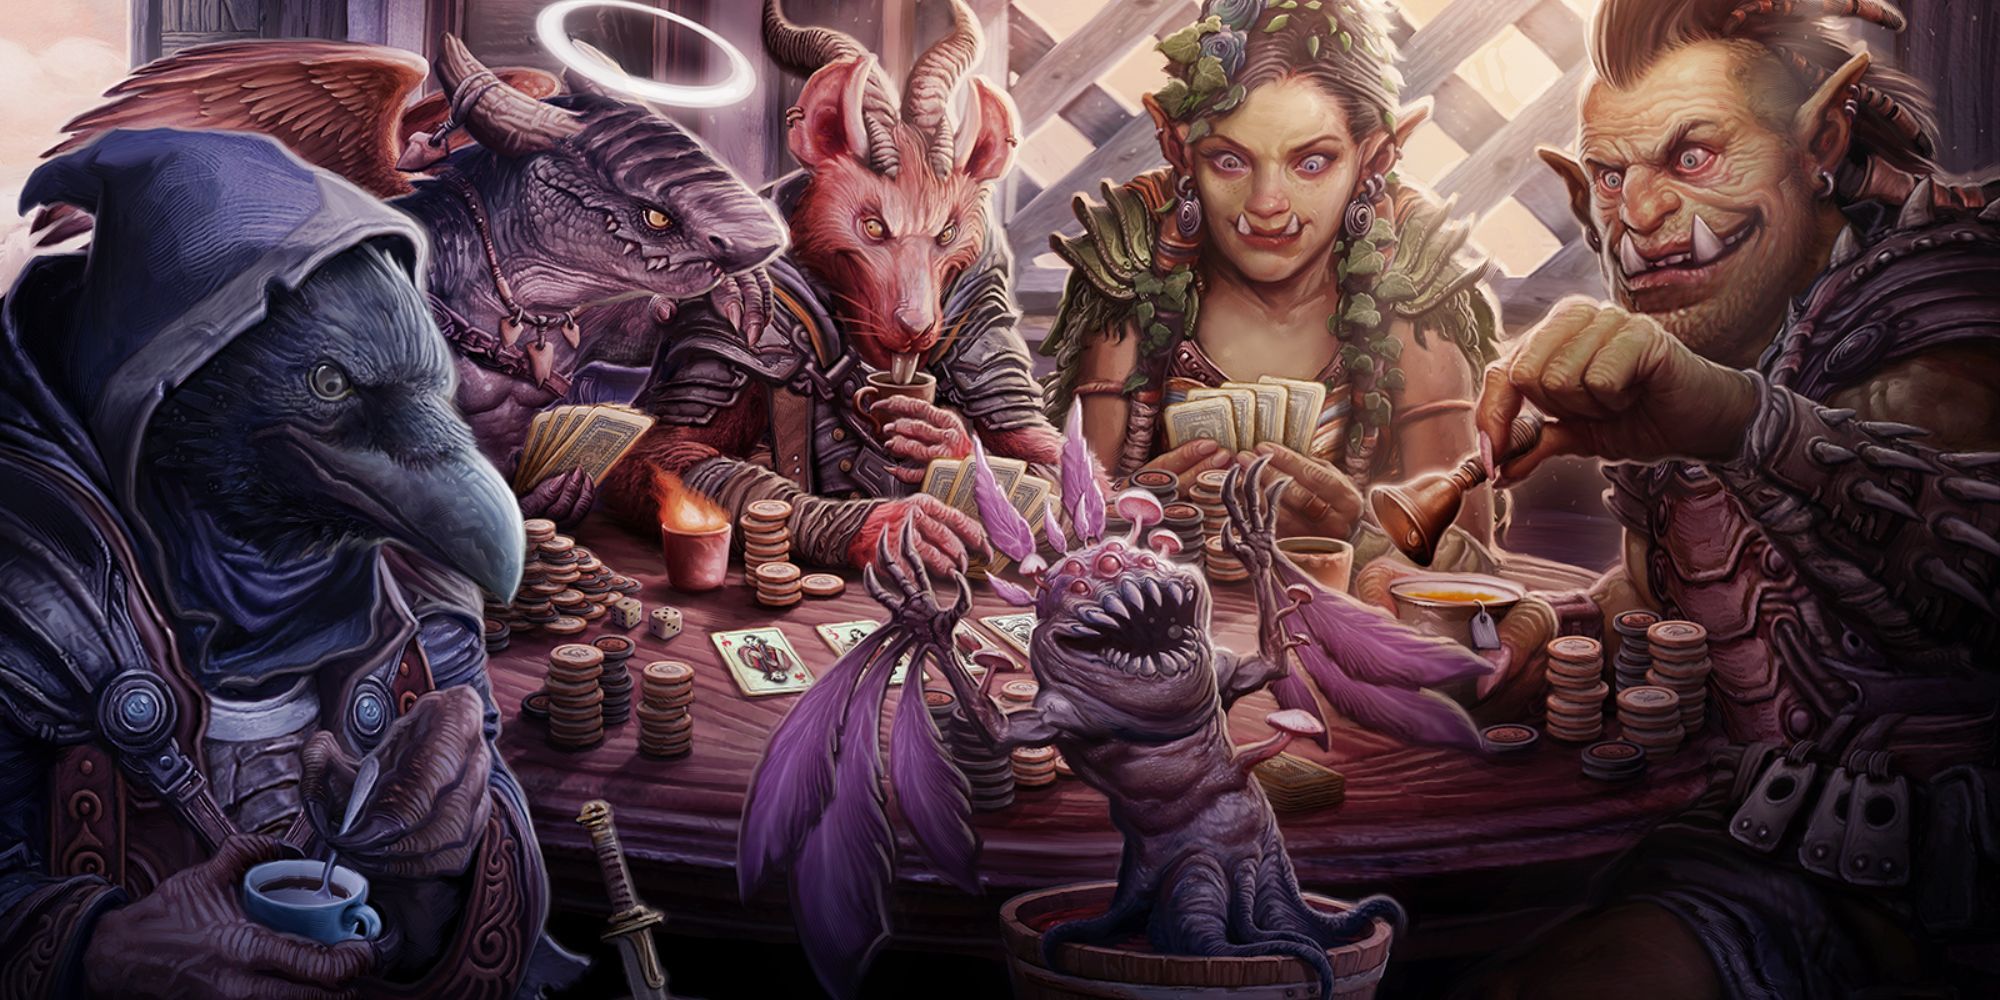 A group of pathfinders gamble over cards in a seedy bar